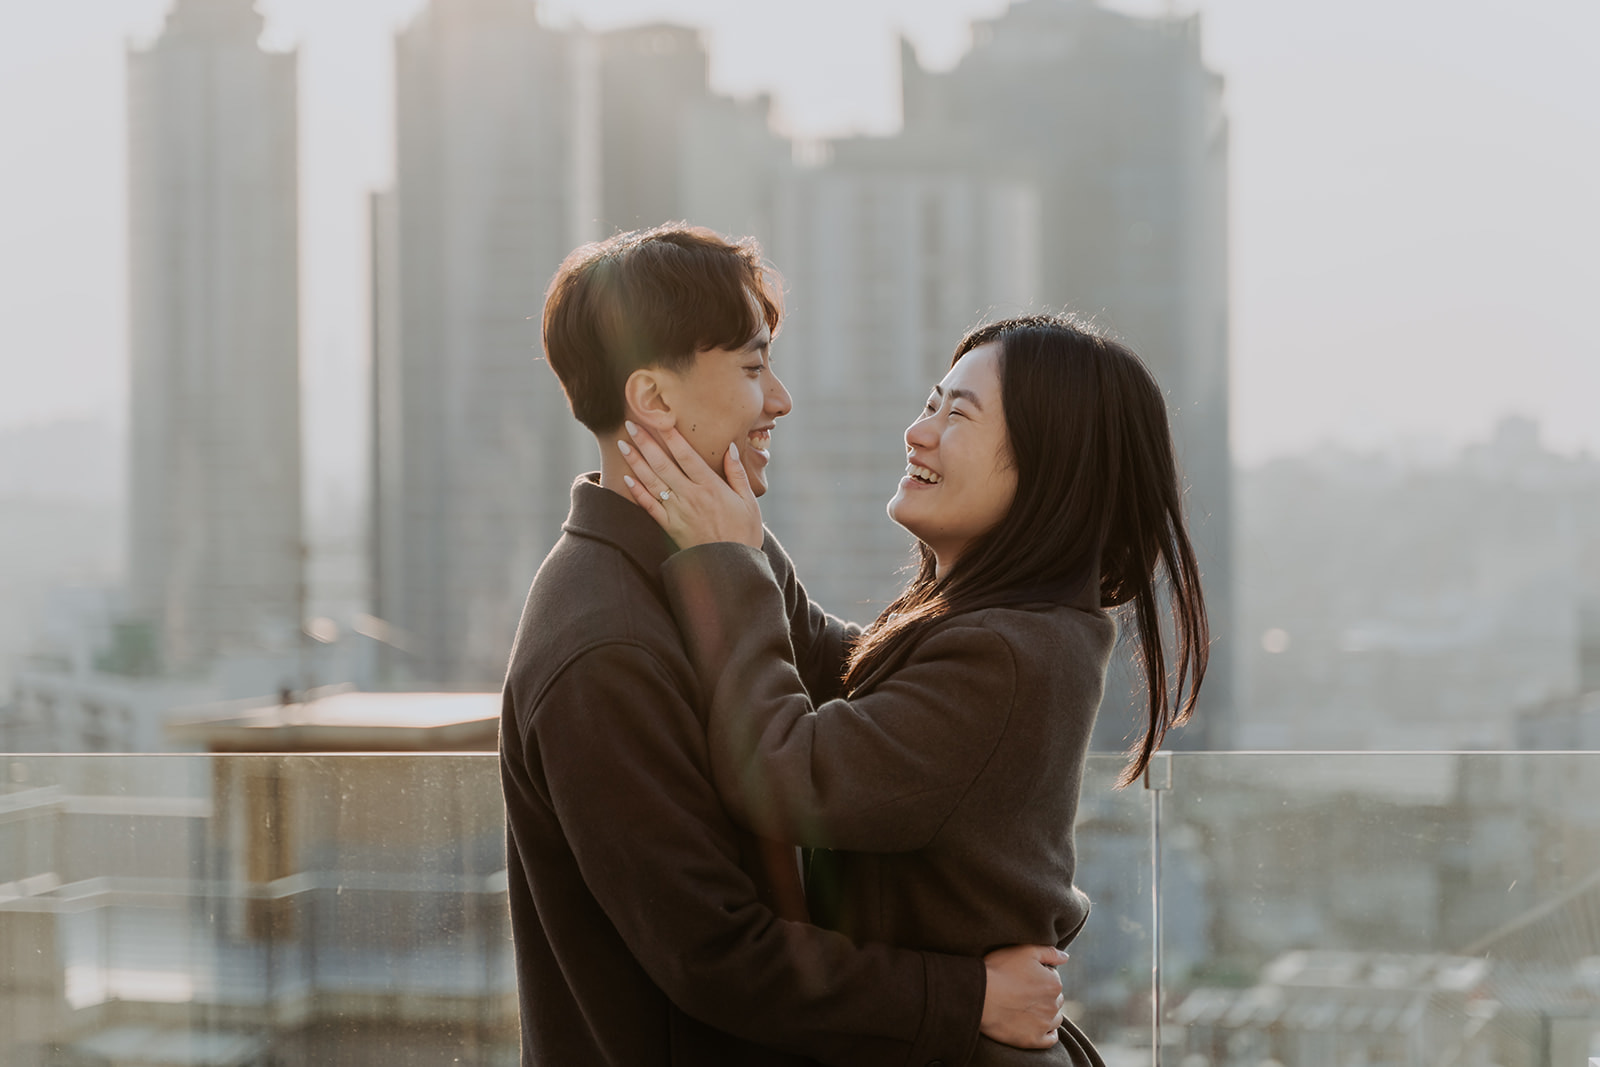 Two individuals share a tender moment on a rooftop with a Seoul cityscape background.